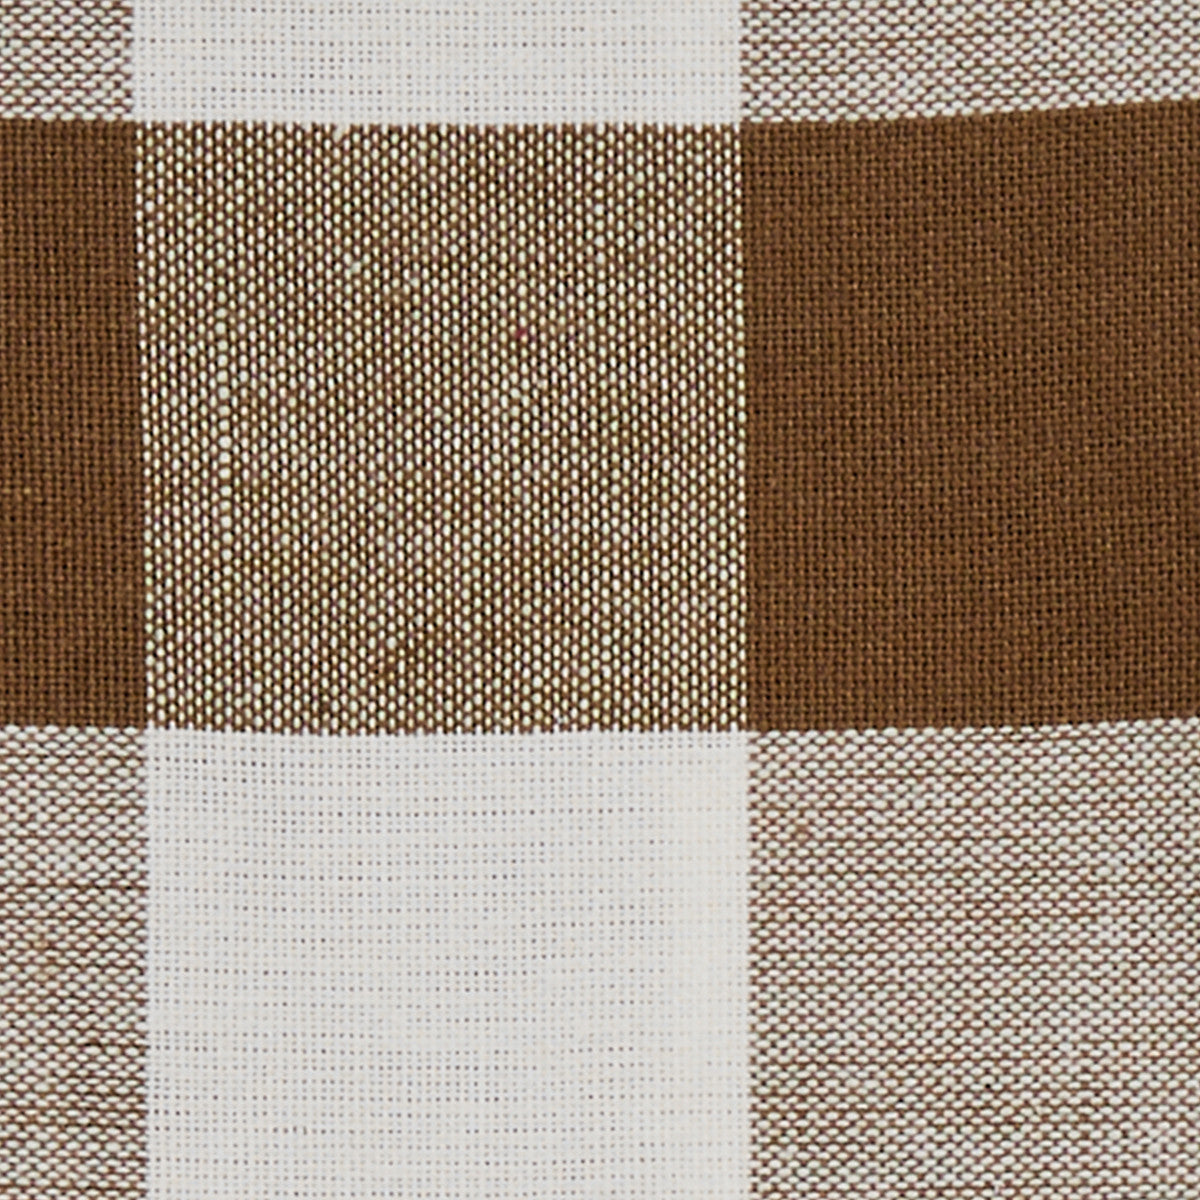 Wicklow Napkins - Brown And Cream  Set Of 12 Check  Park Designs